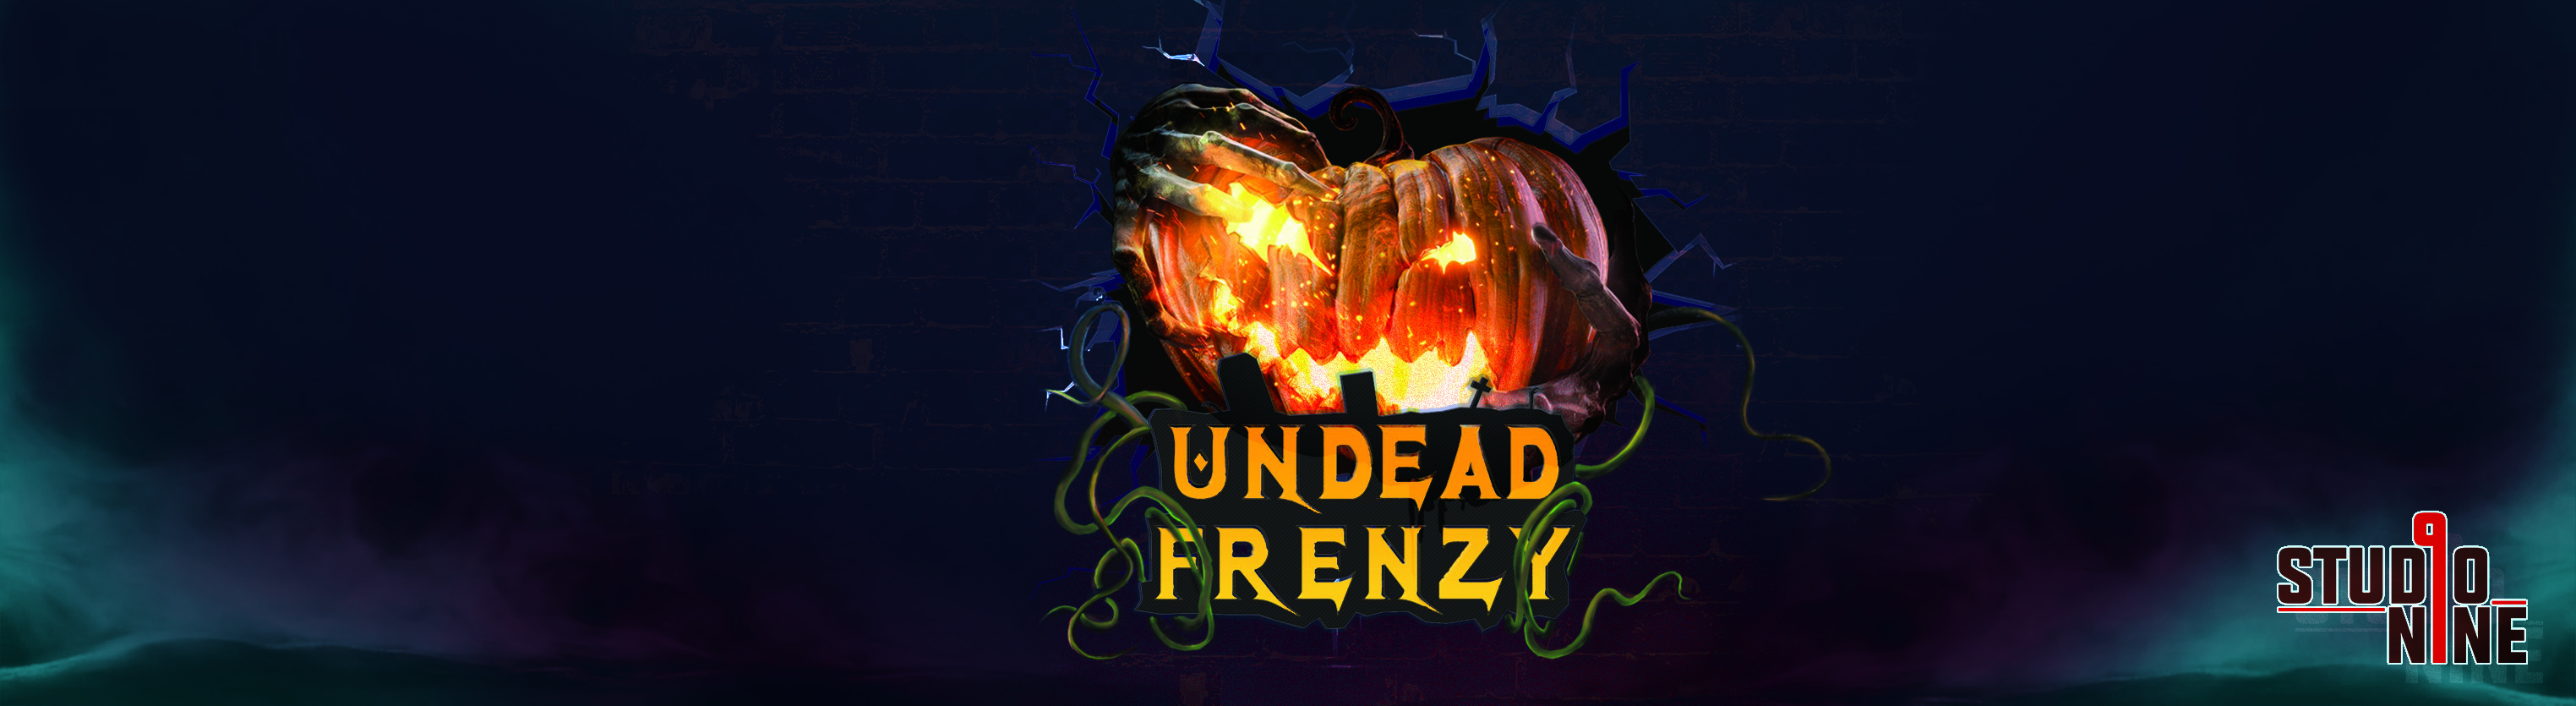 Undead Frenzy VR